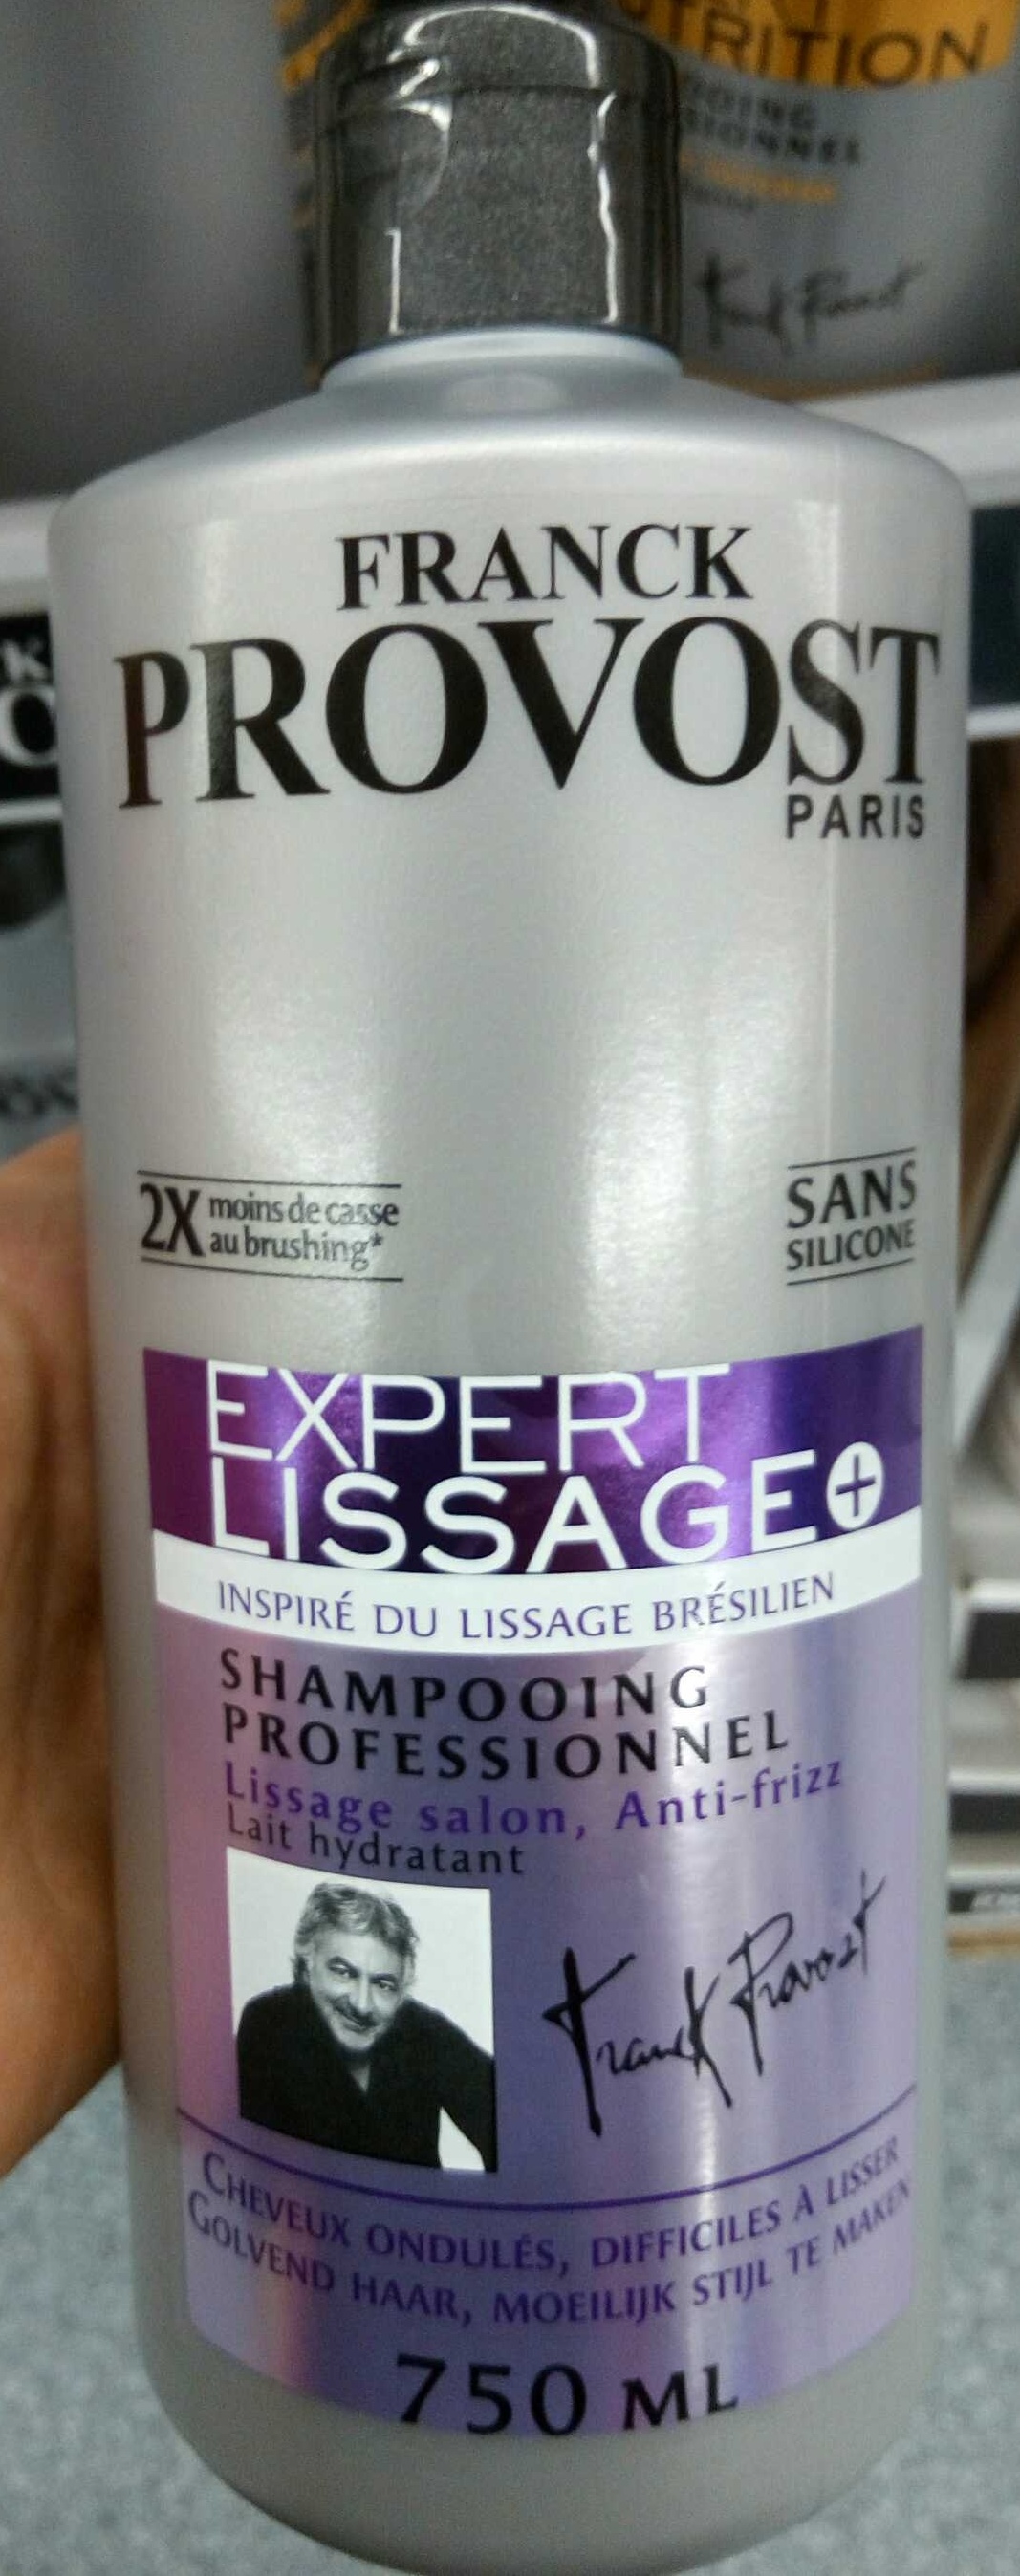 Expert lissage+ shampooing professionnel - Tuote - fr